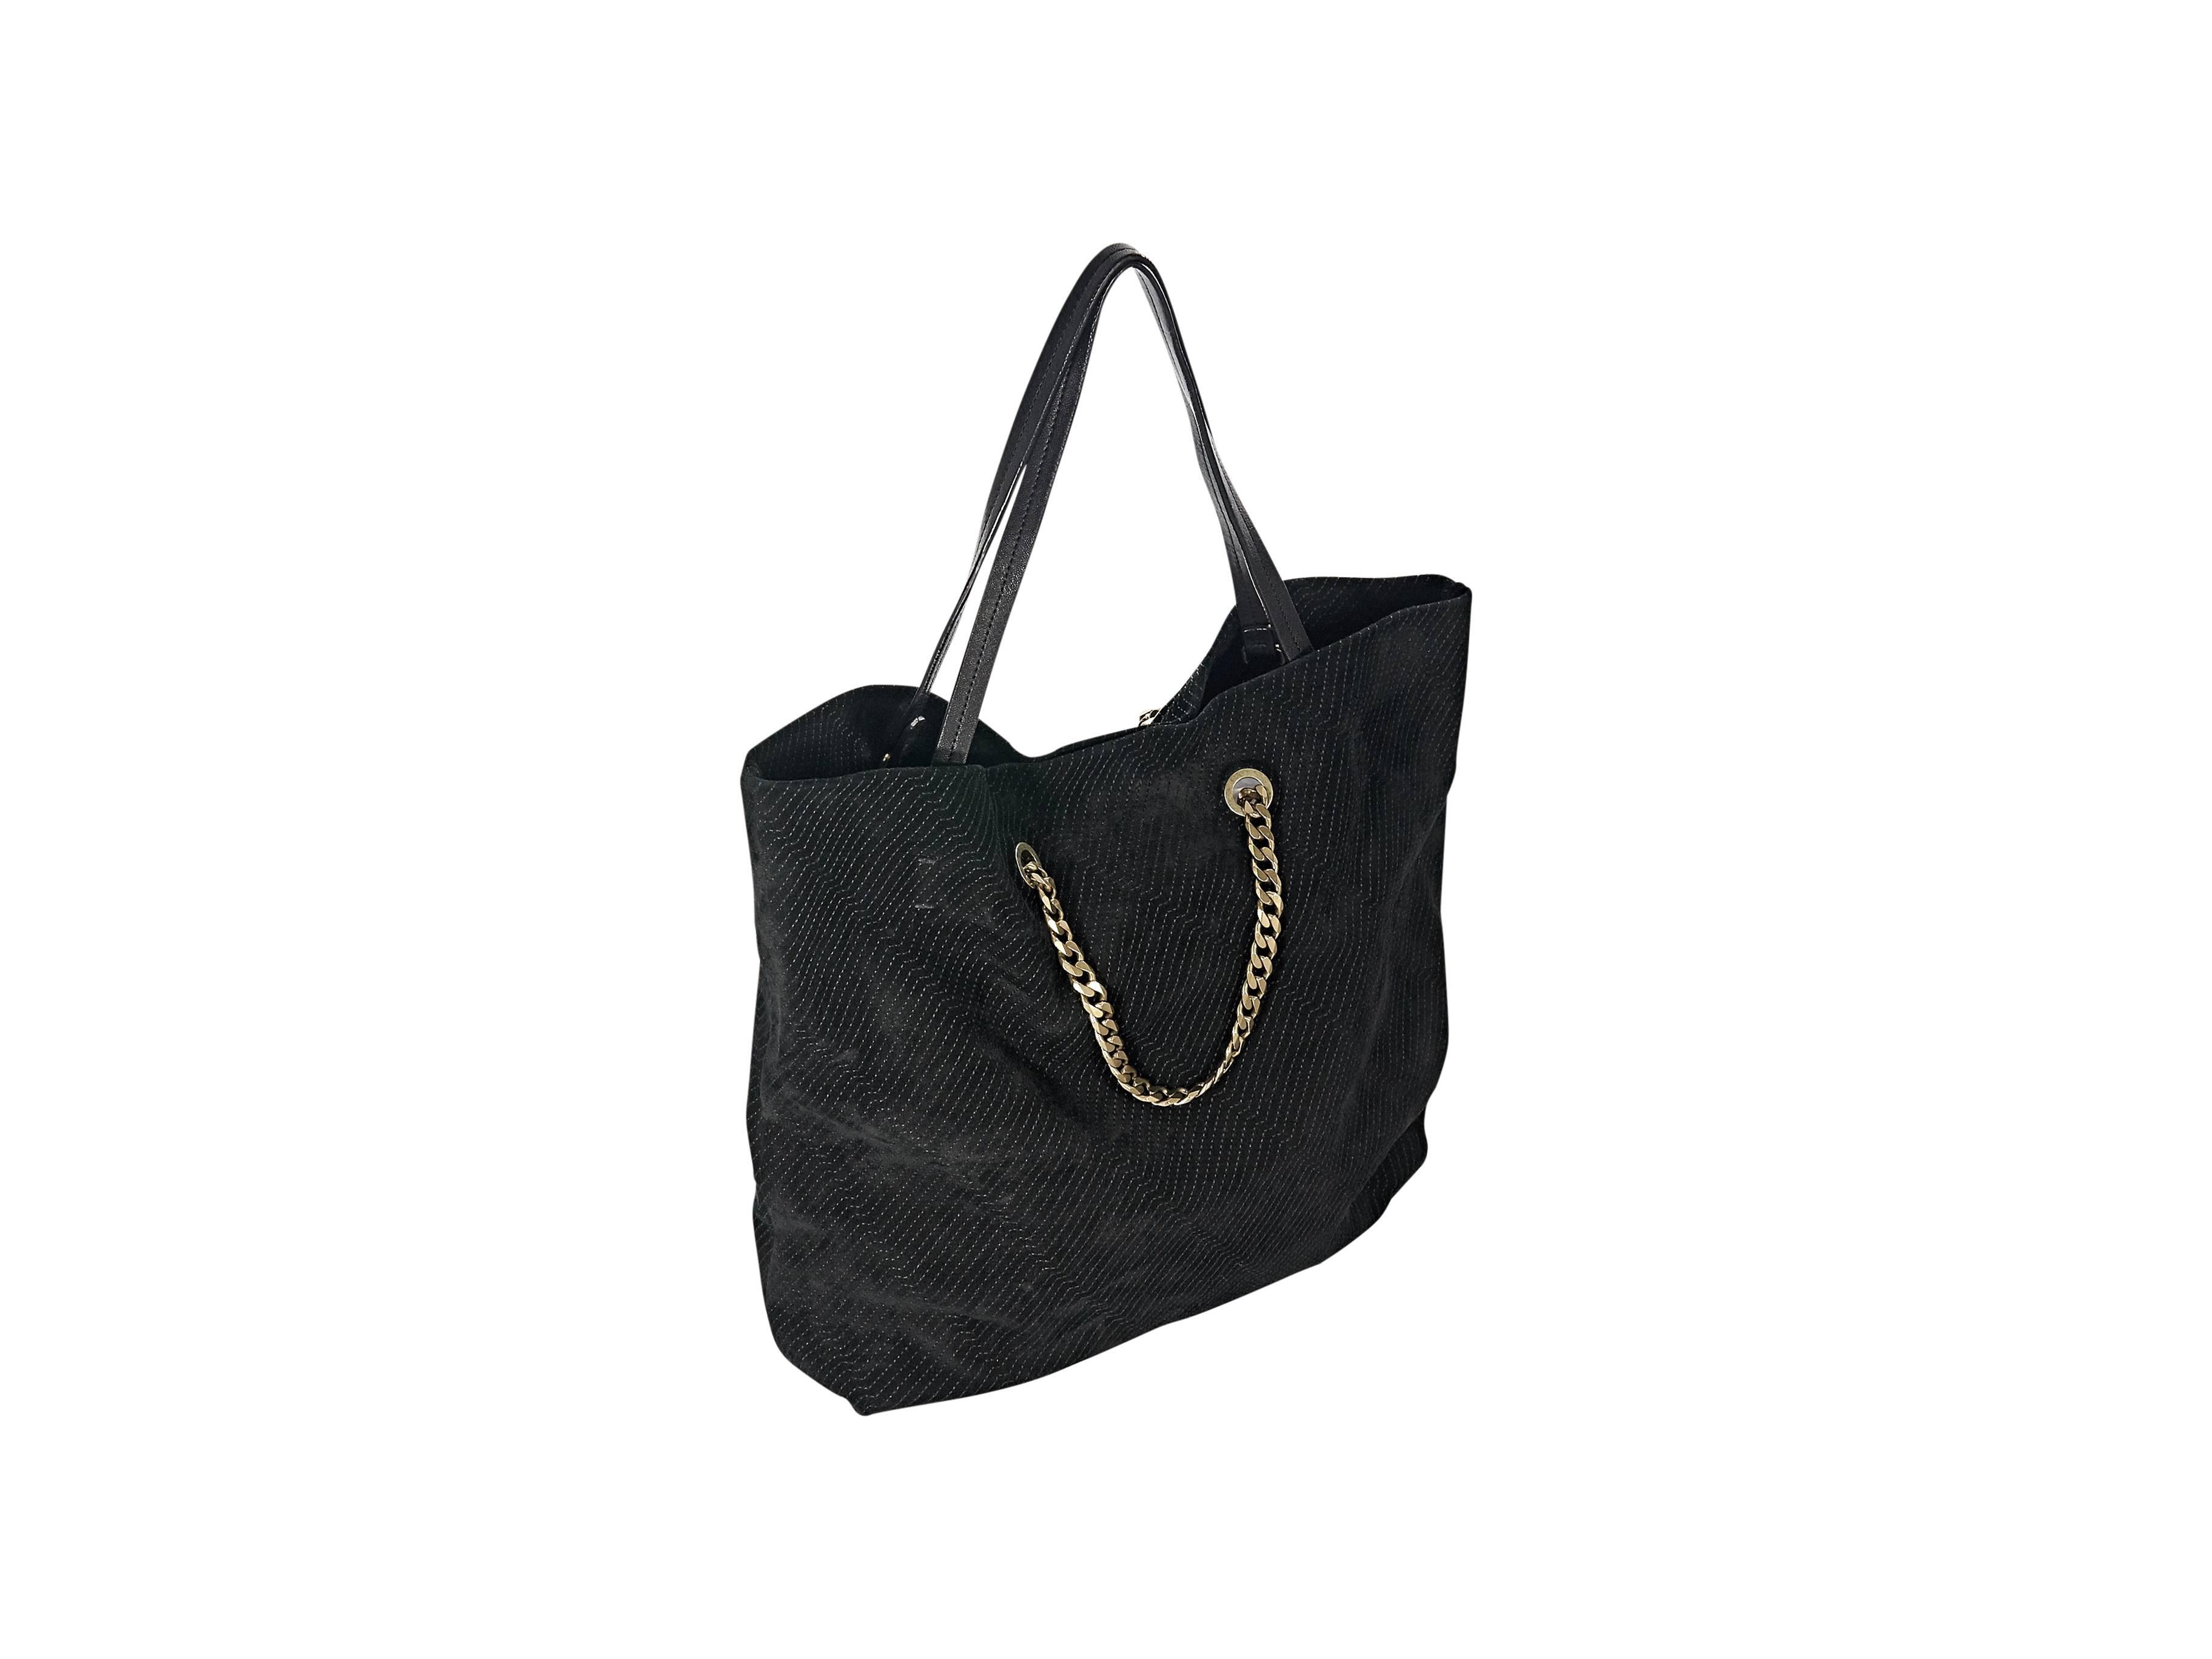 Product details: Black suede topstitched Carry Me tote bag by Lanvin. Front chain accent. Dual shoulder straps. Lined interior with inner slide and zip pockets. Goldtone hardware. Dust bag included. 14